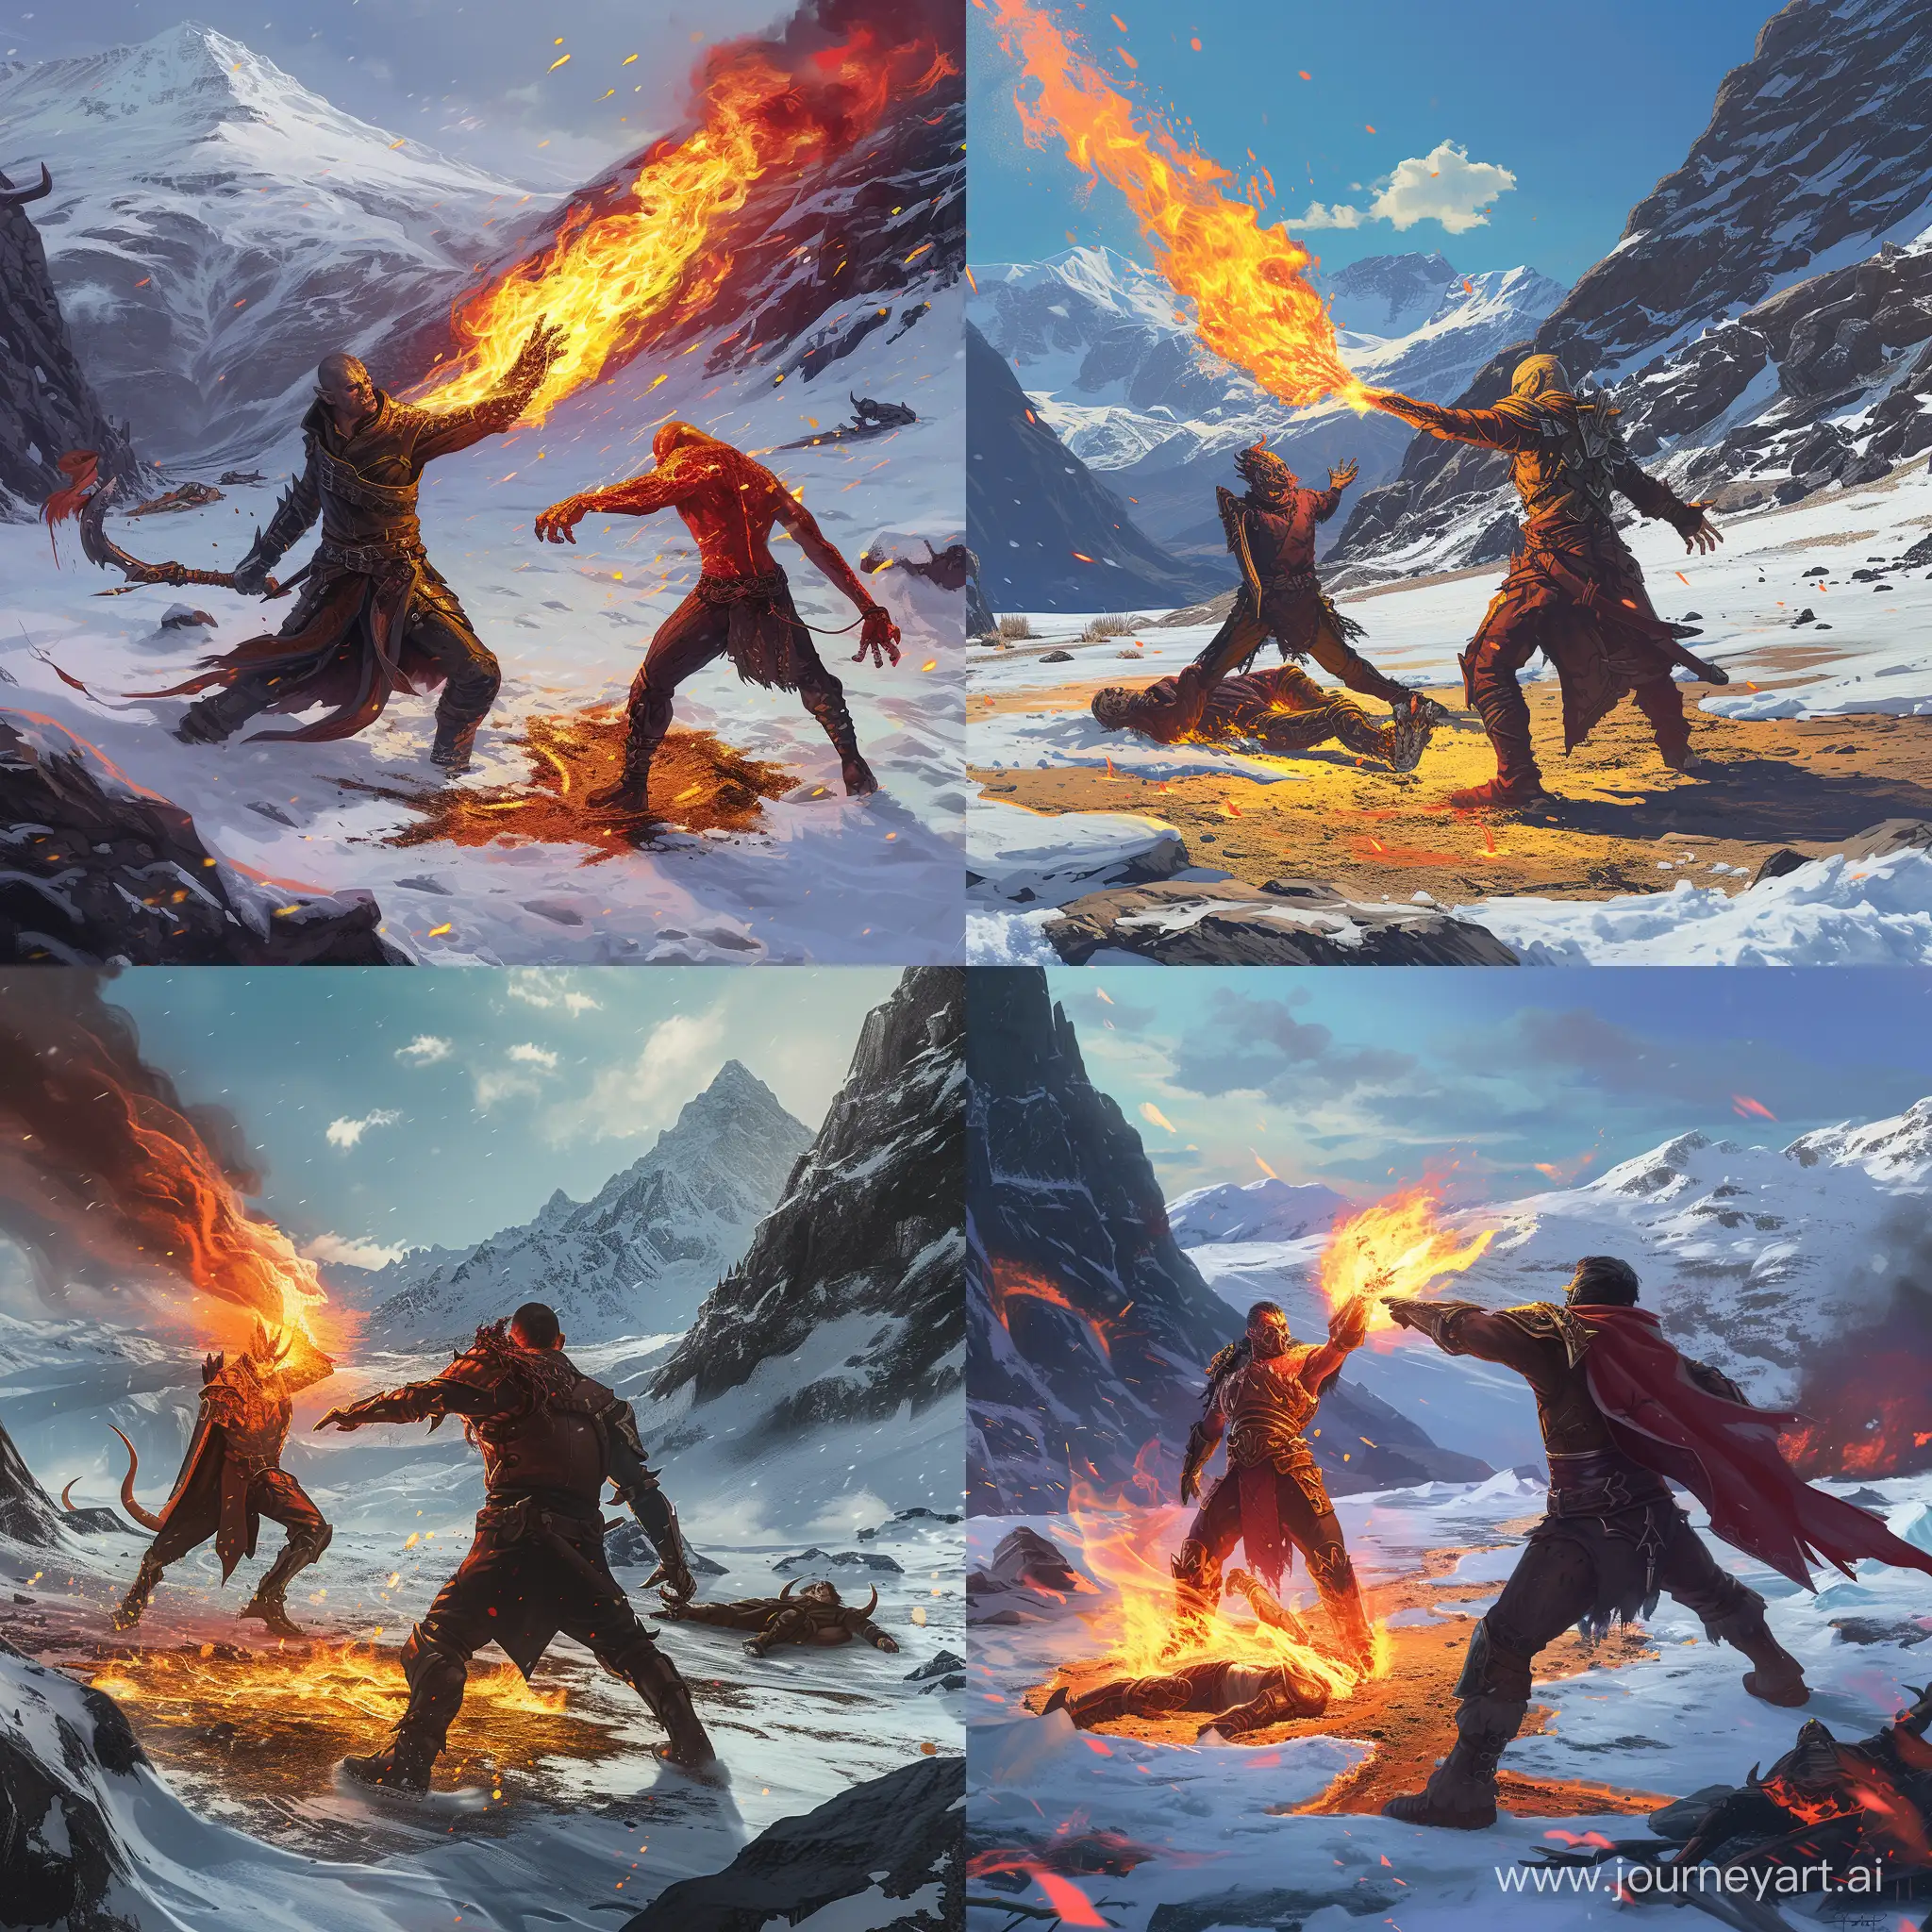 The fire demon strikes a blow with his hand at Drake, who parries the blow with his fire sword. Behind Drake's back lies the body of the defeated magician, around the mountain And snow lies on the ground, in the place where the Demon stands there is bare earth with melted snow, concept art, 4k